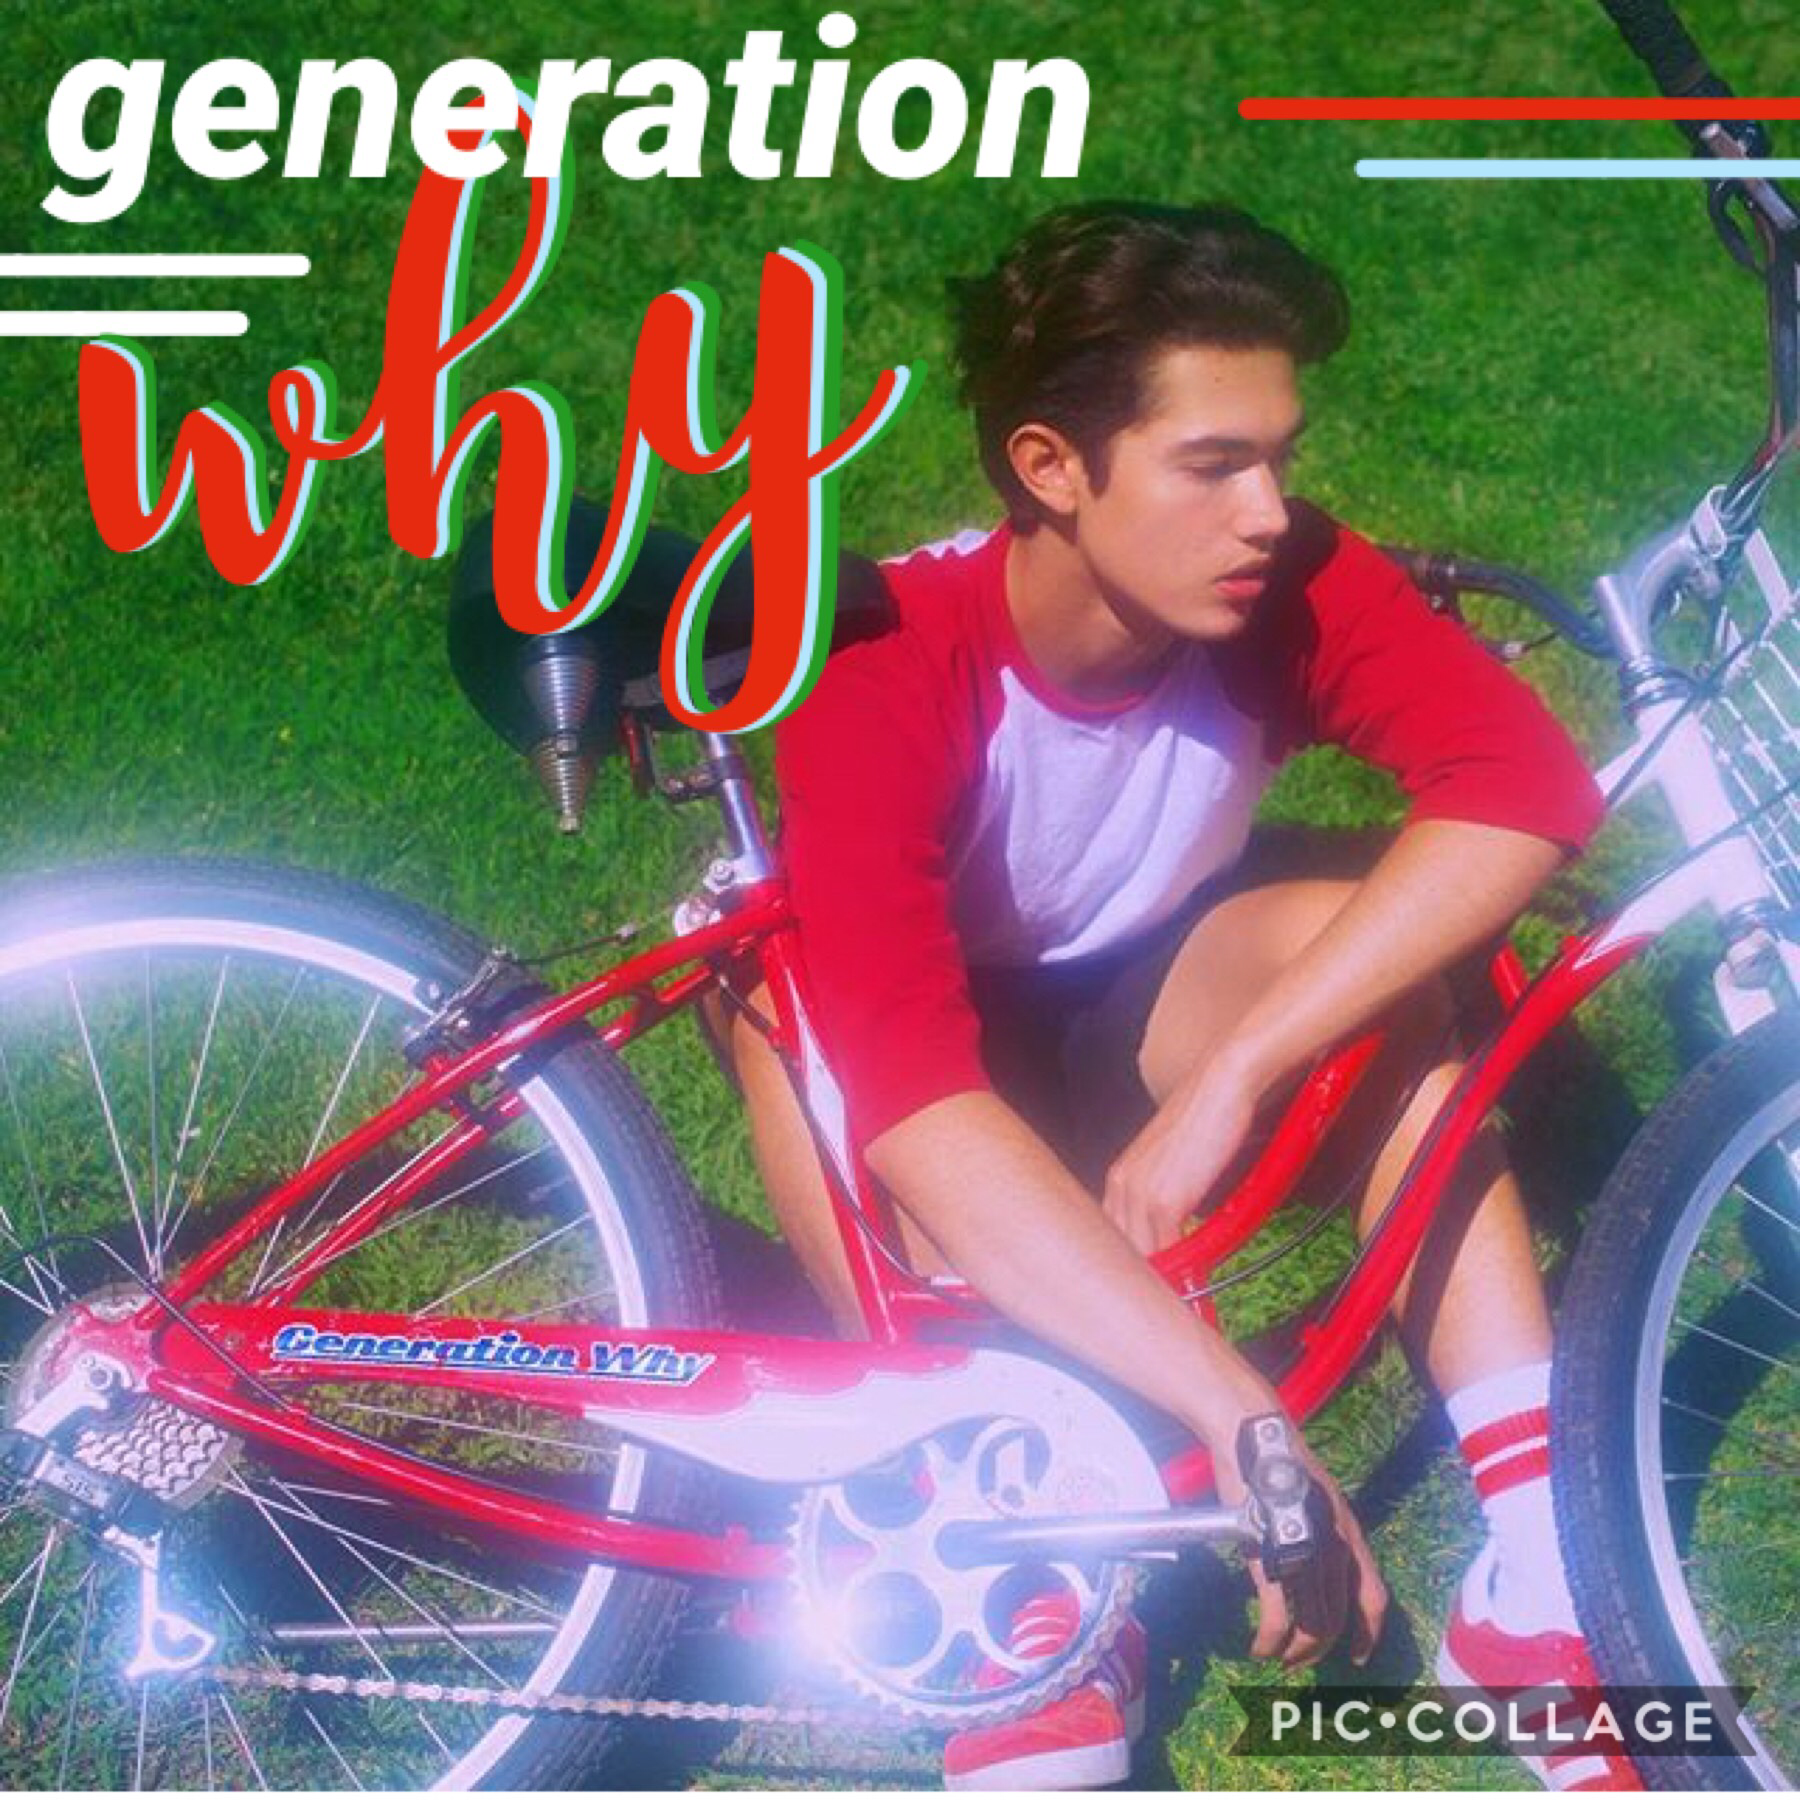 generation why•conan gray
“Something that I've heard a million times in my life Generation Why”
THIS! SONG! IS! SO! GOOD! 